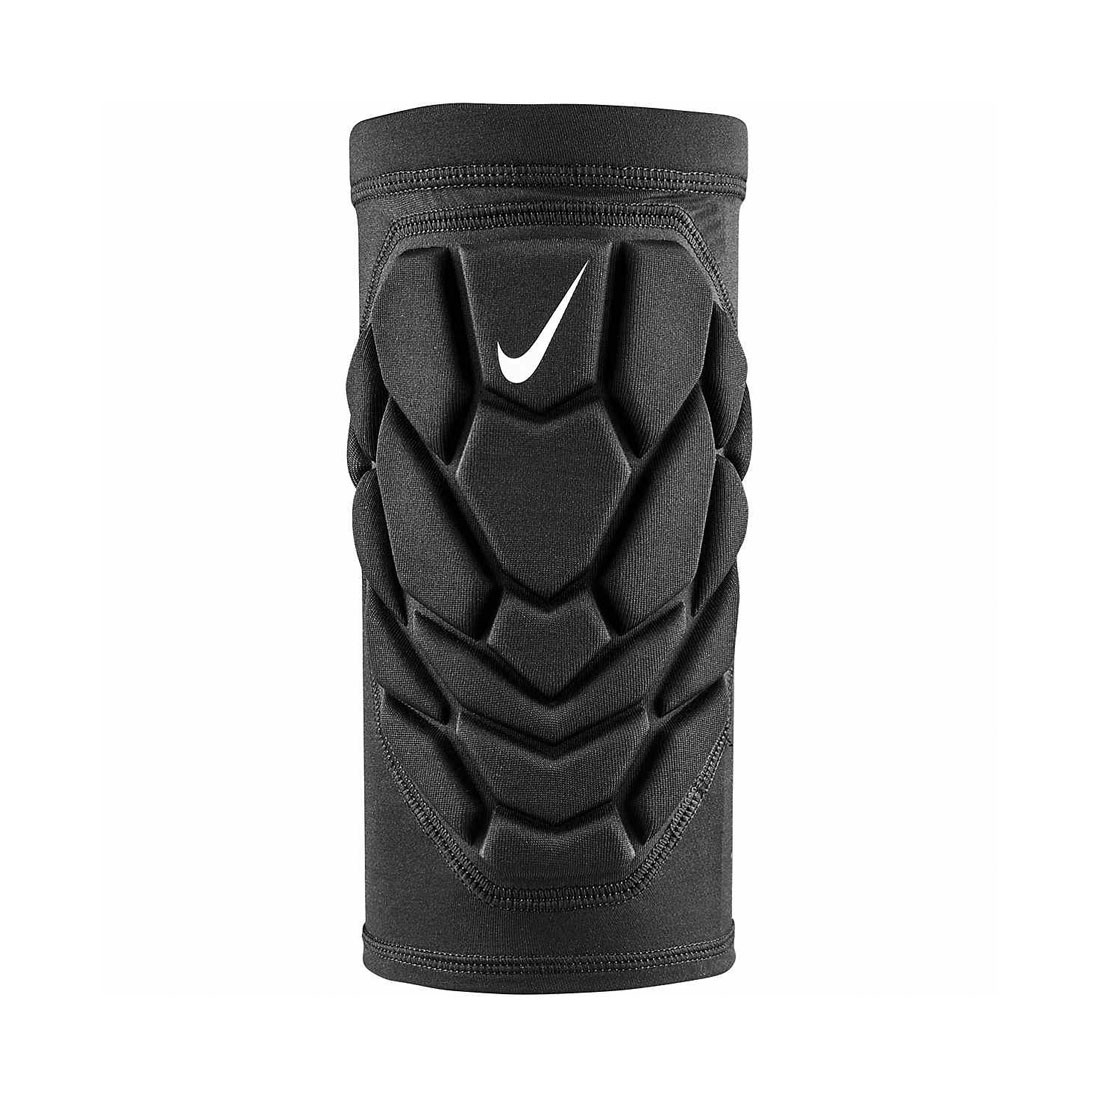 Nike Pro Hyperstrong Padded Bicep Sleeves